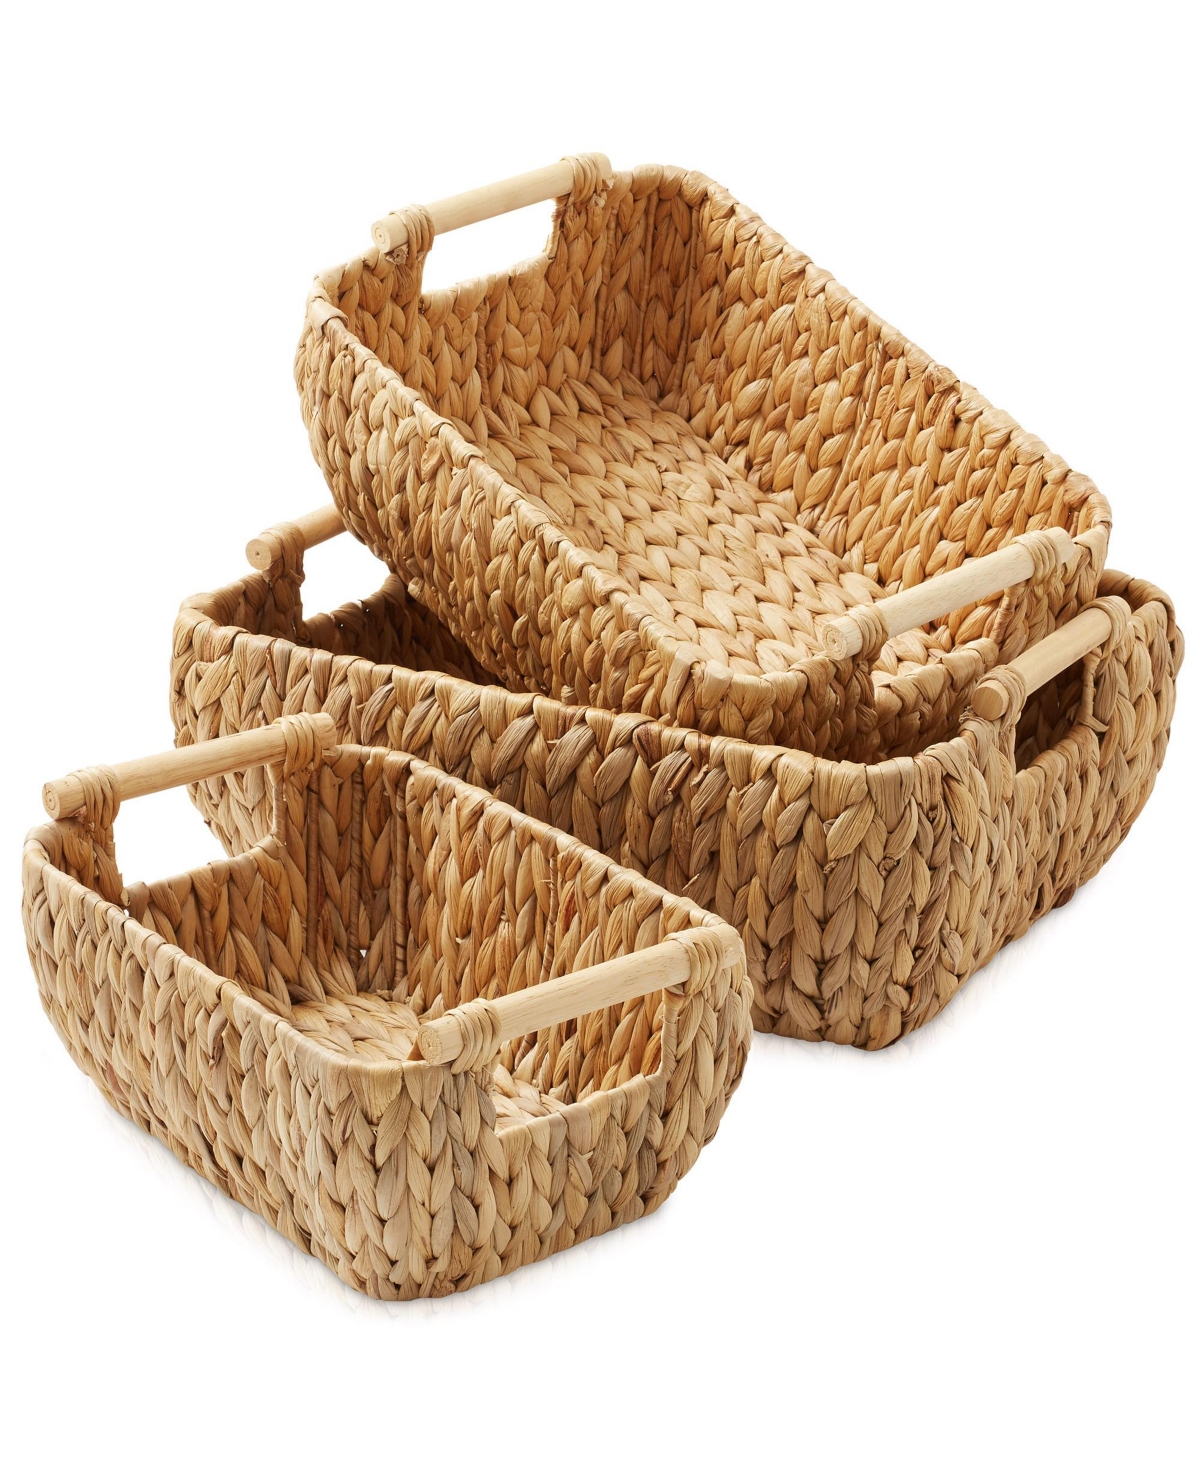 (Set of 2) Water Hyacinth Oval Storage Baskets with Wooden Handles - Small Woven Bin Organizers - Natural - hyacinth